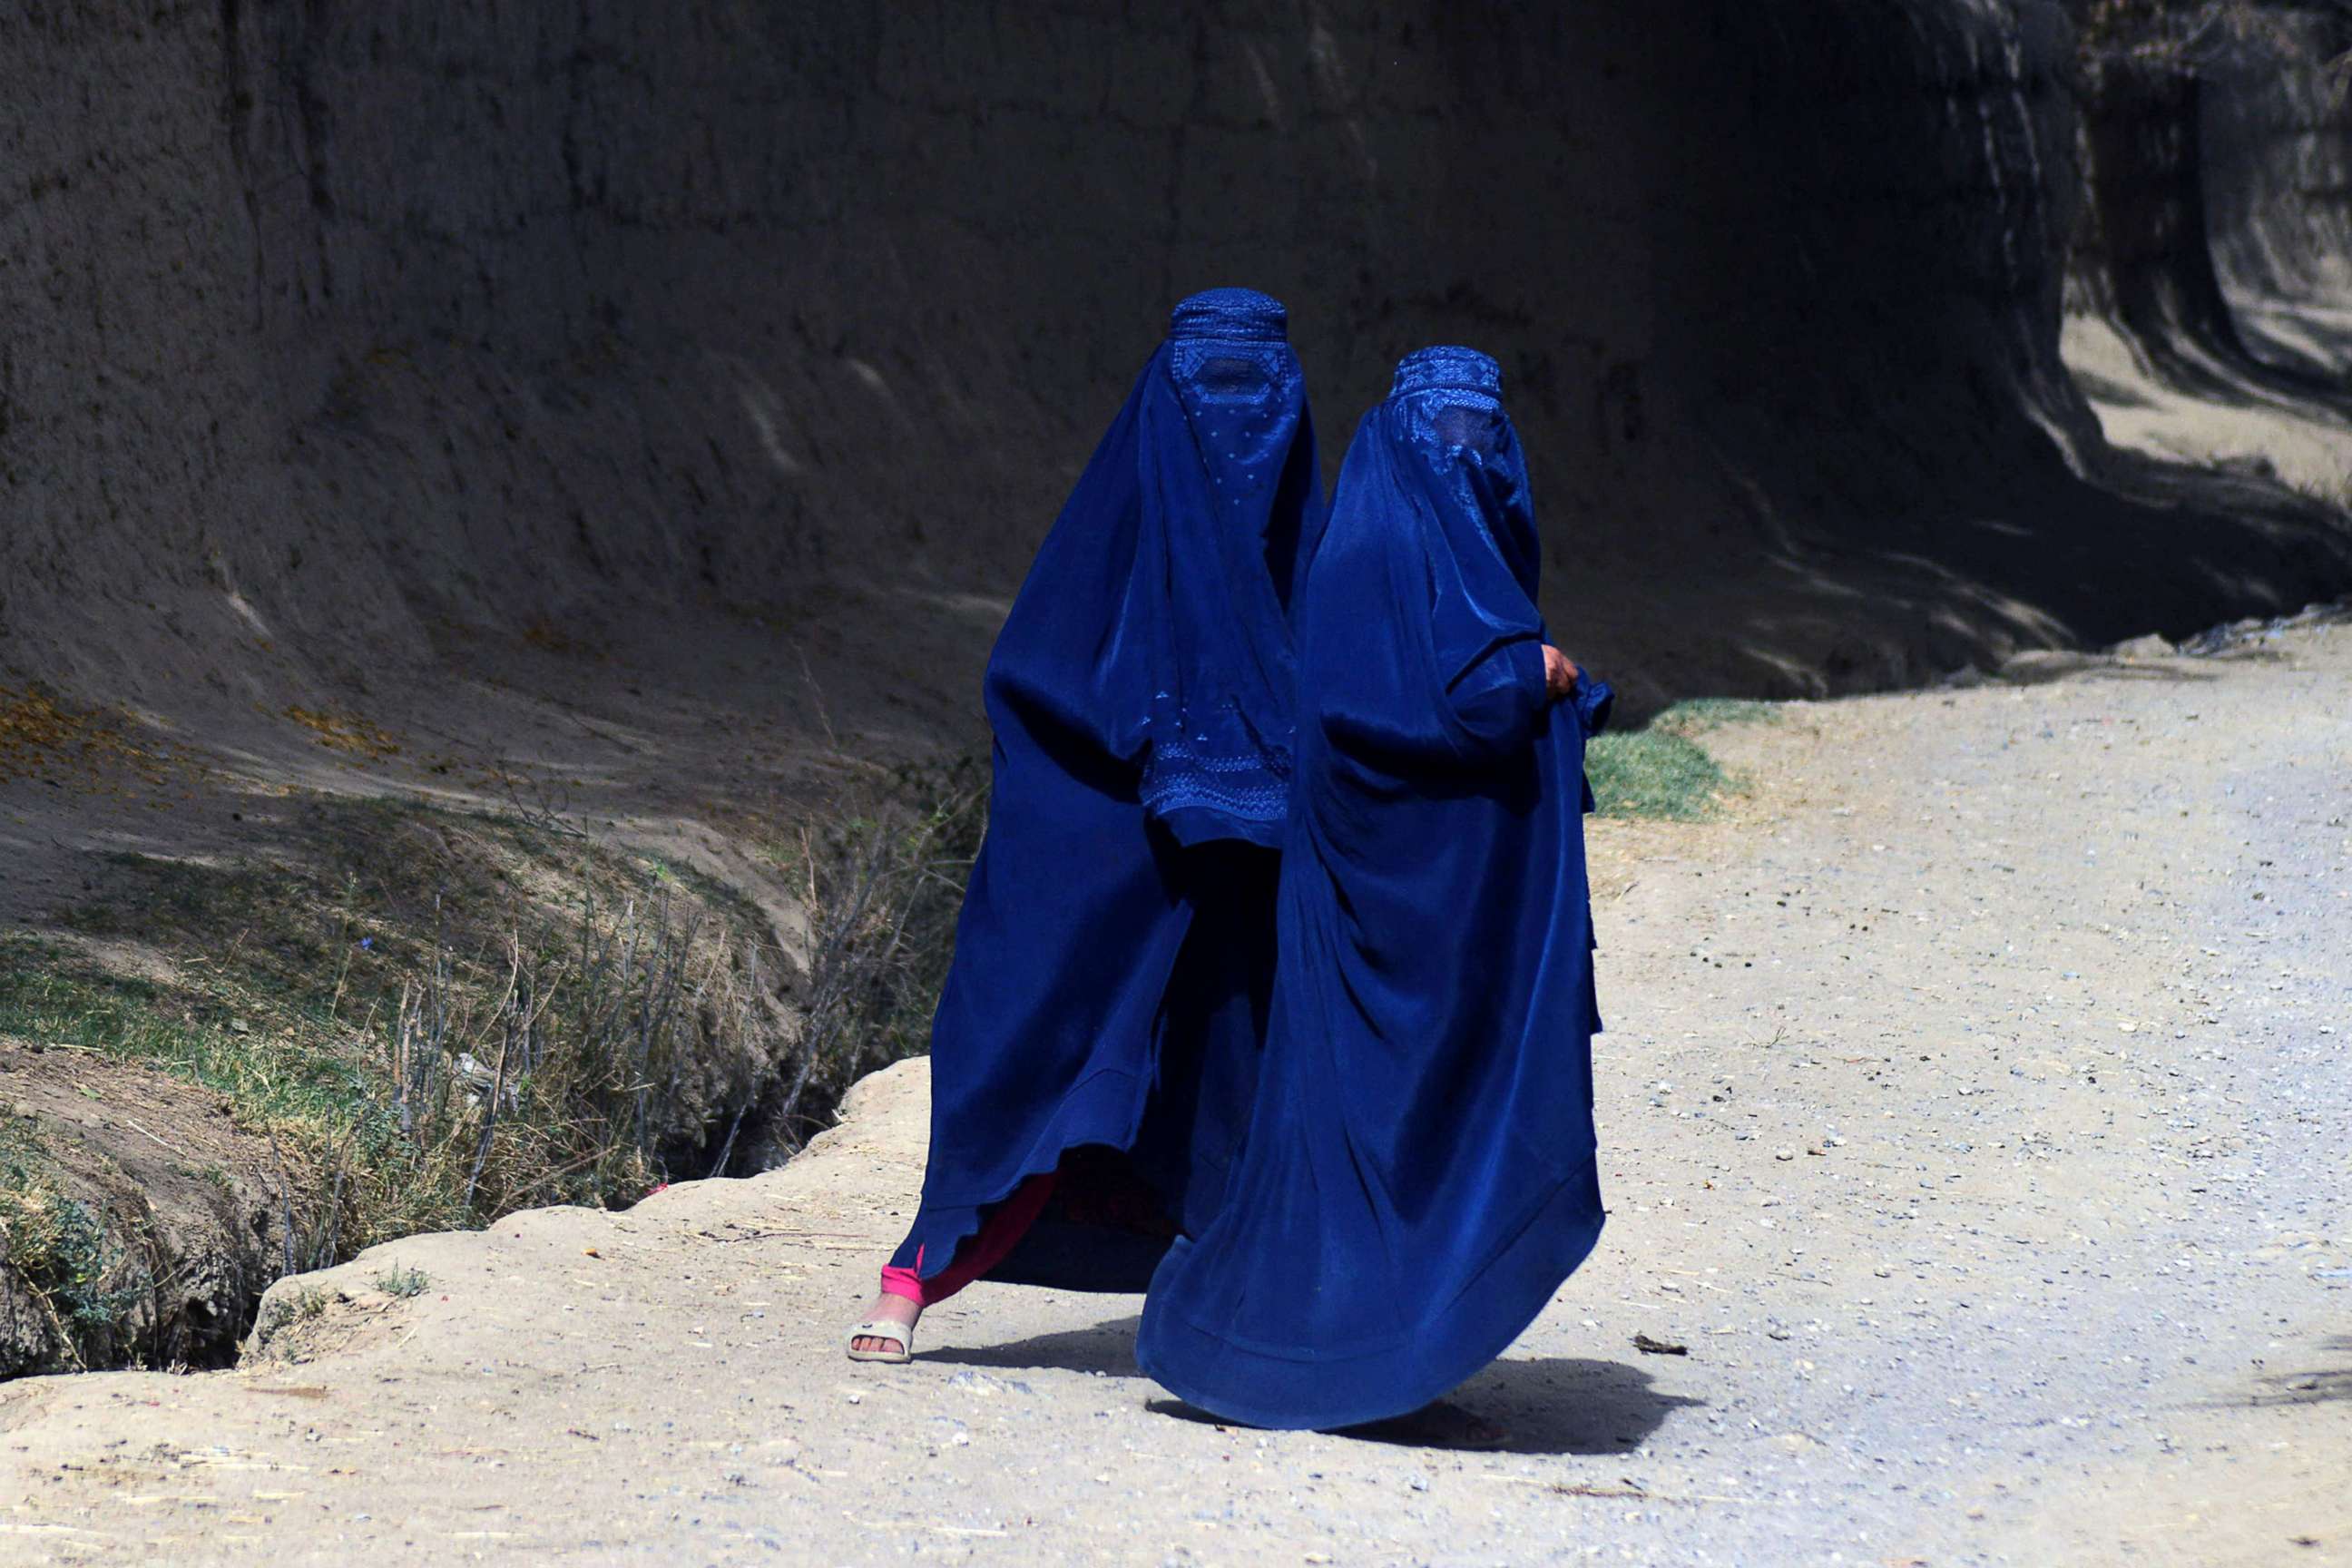 PHOTO: Women wearing a burqa walk along a path in Arghandab district in the central part of Kandahar Province in Afghanistan, Oct. 7, 2021. 